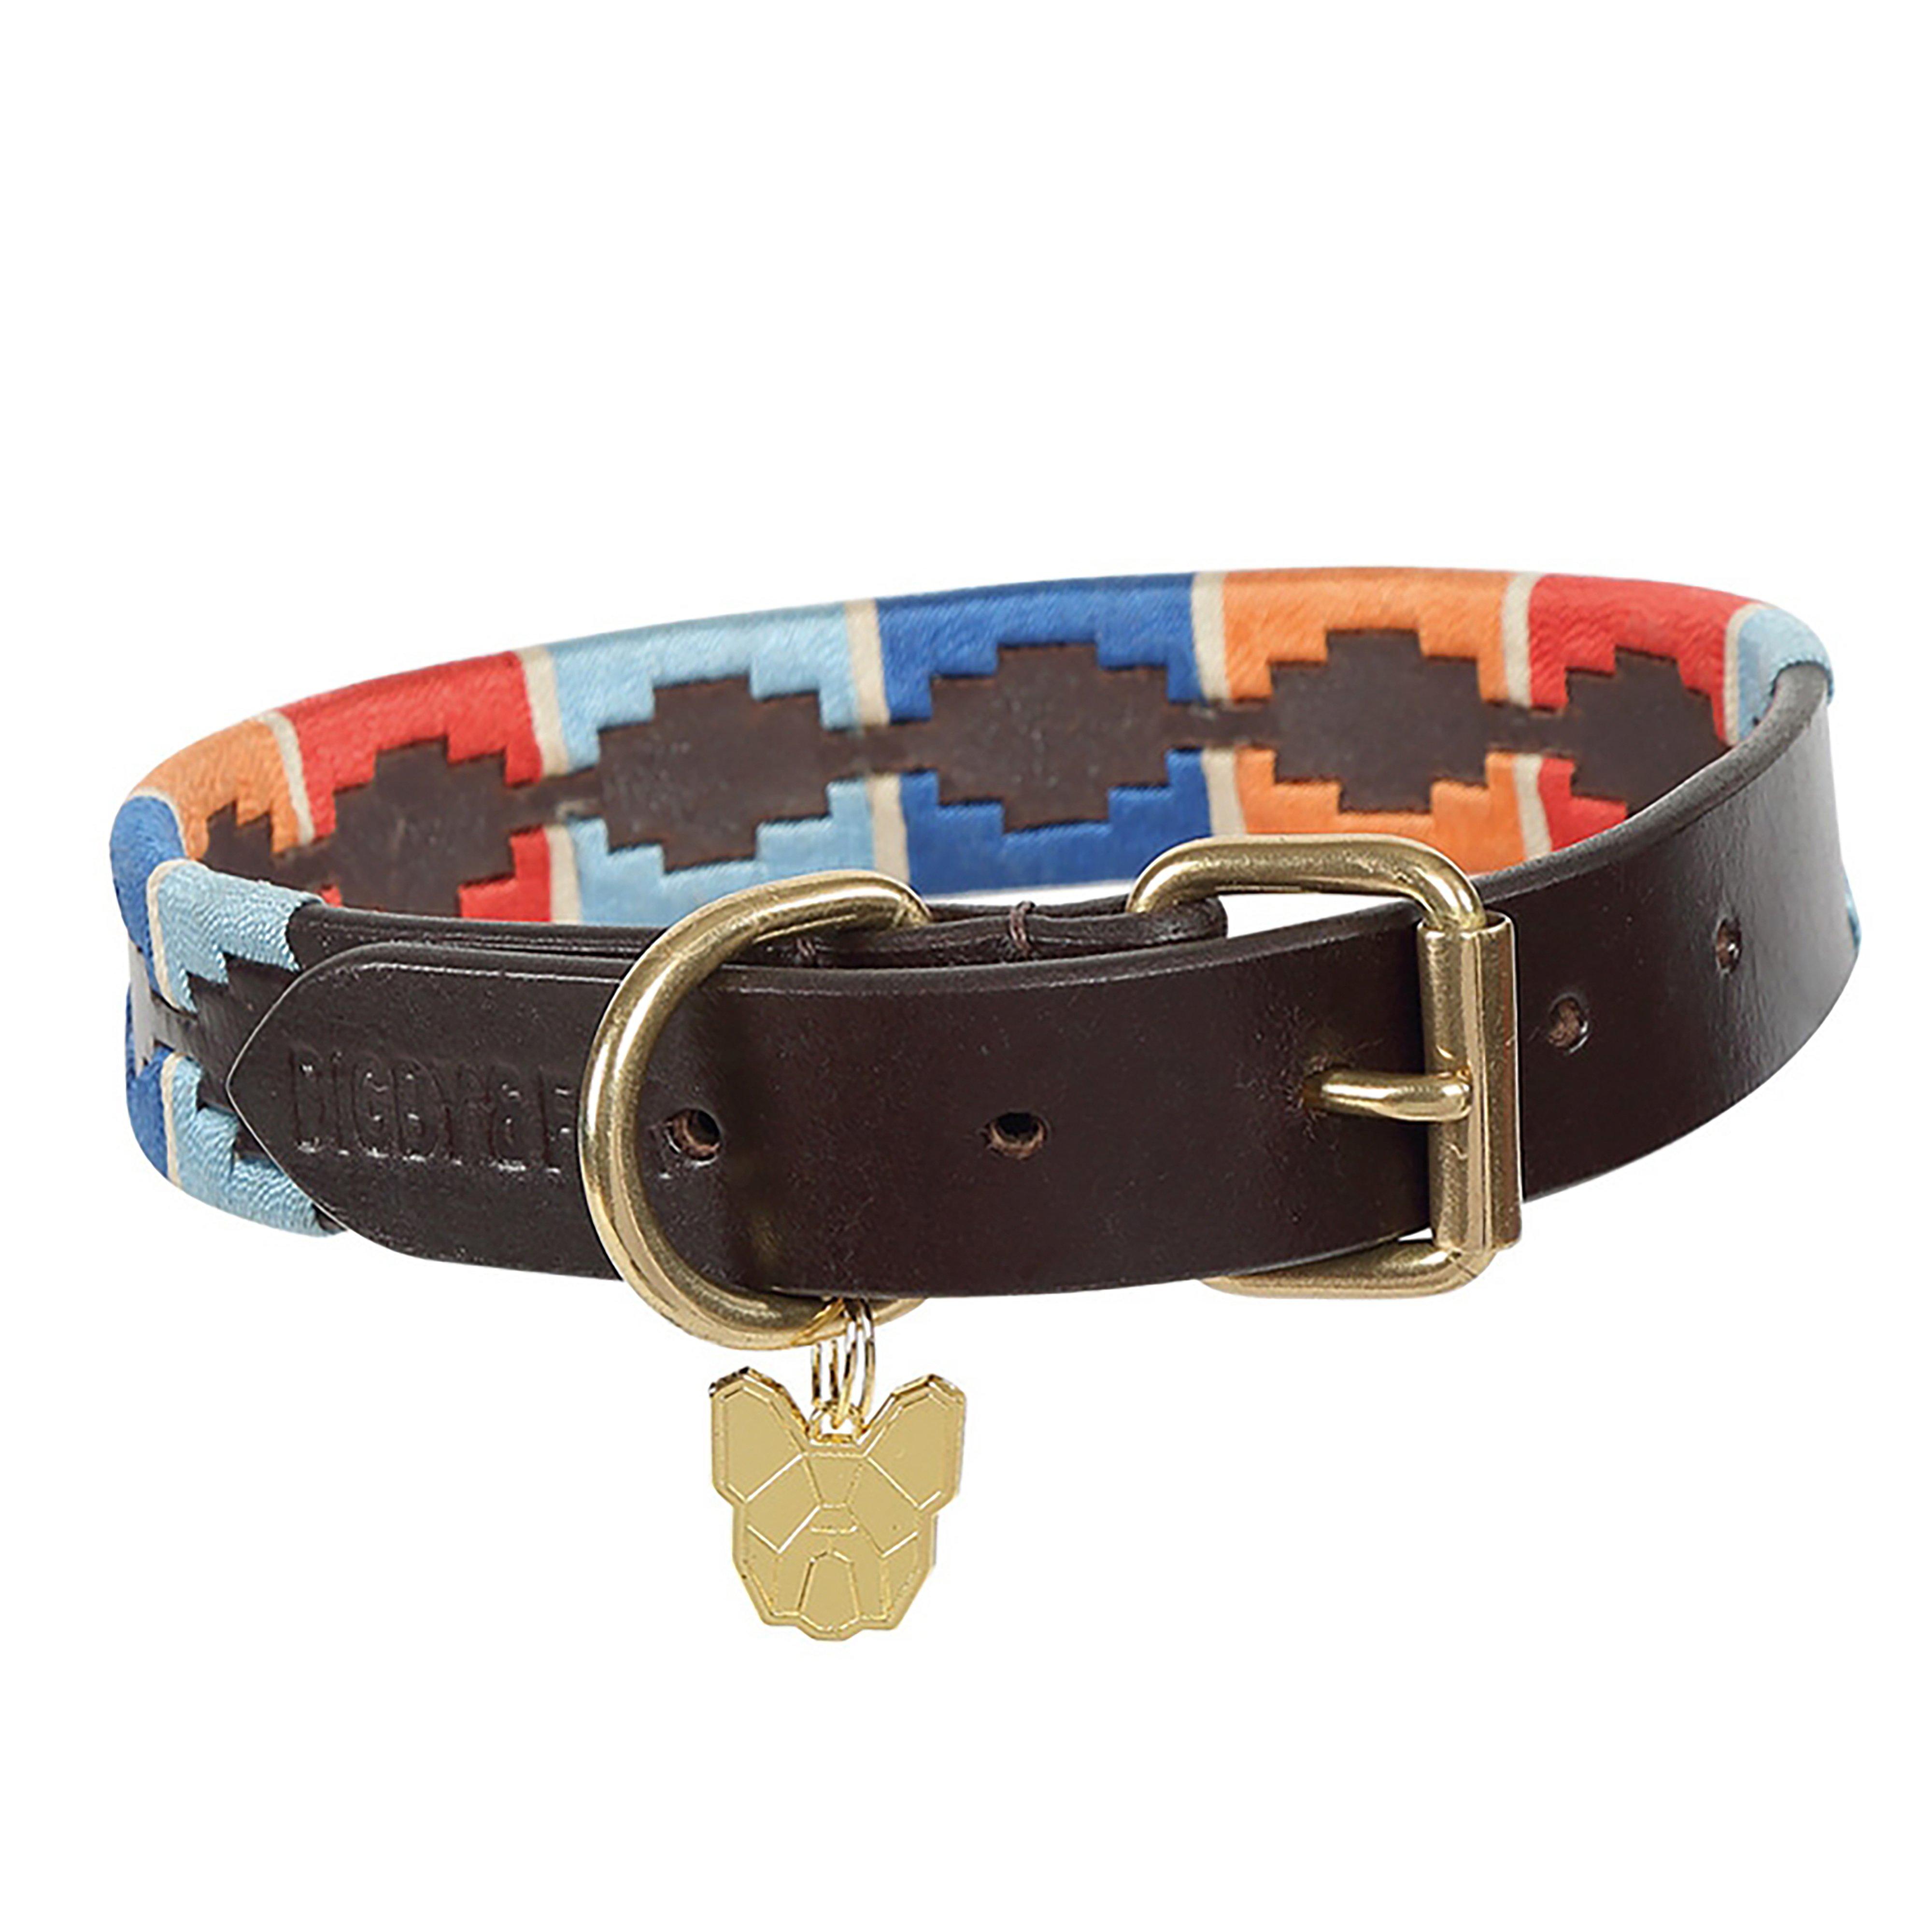 Drover Polo Dog Collar Turquoise/Red/Orange